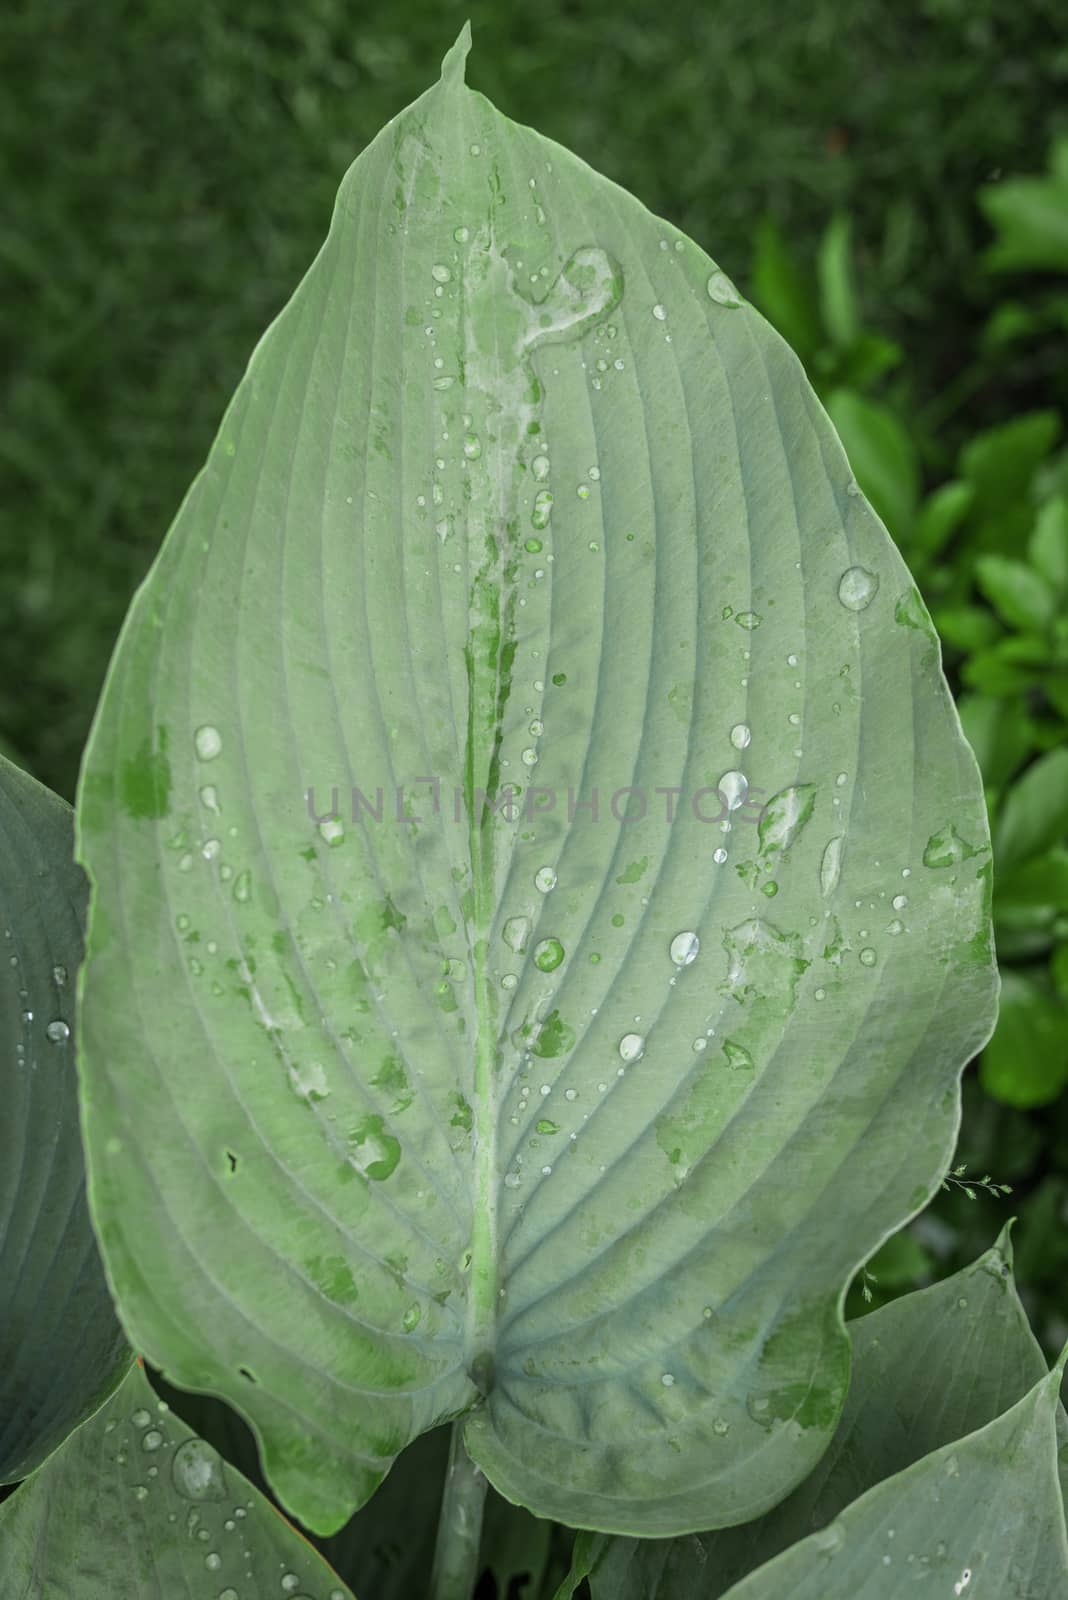 Green leaf with raindrops in a garden by Sportactive